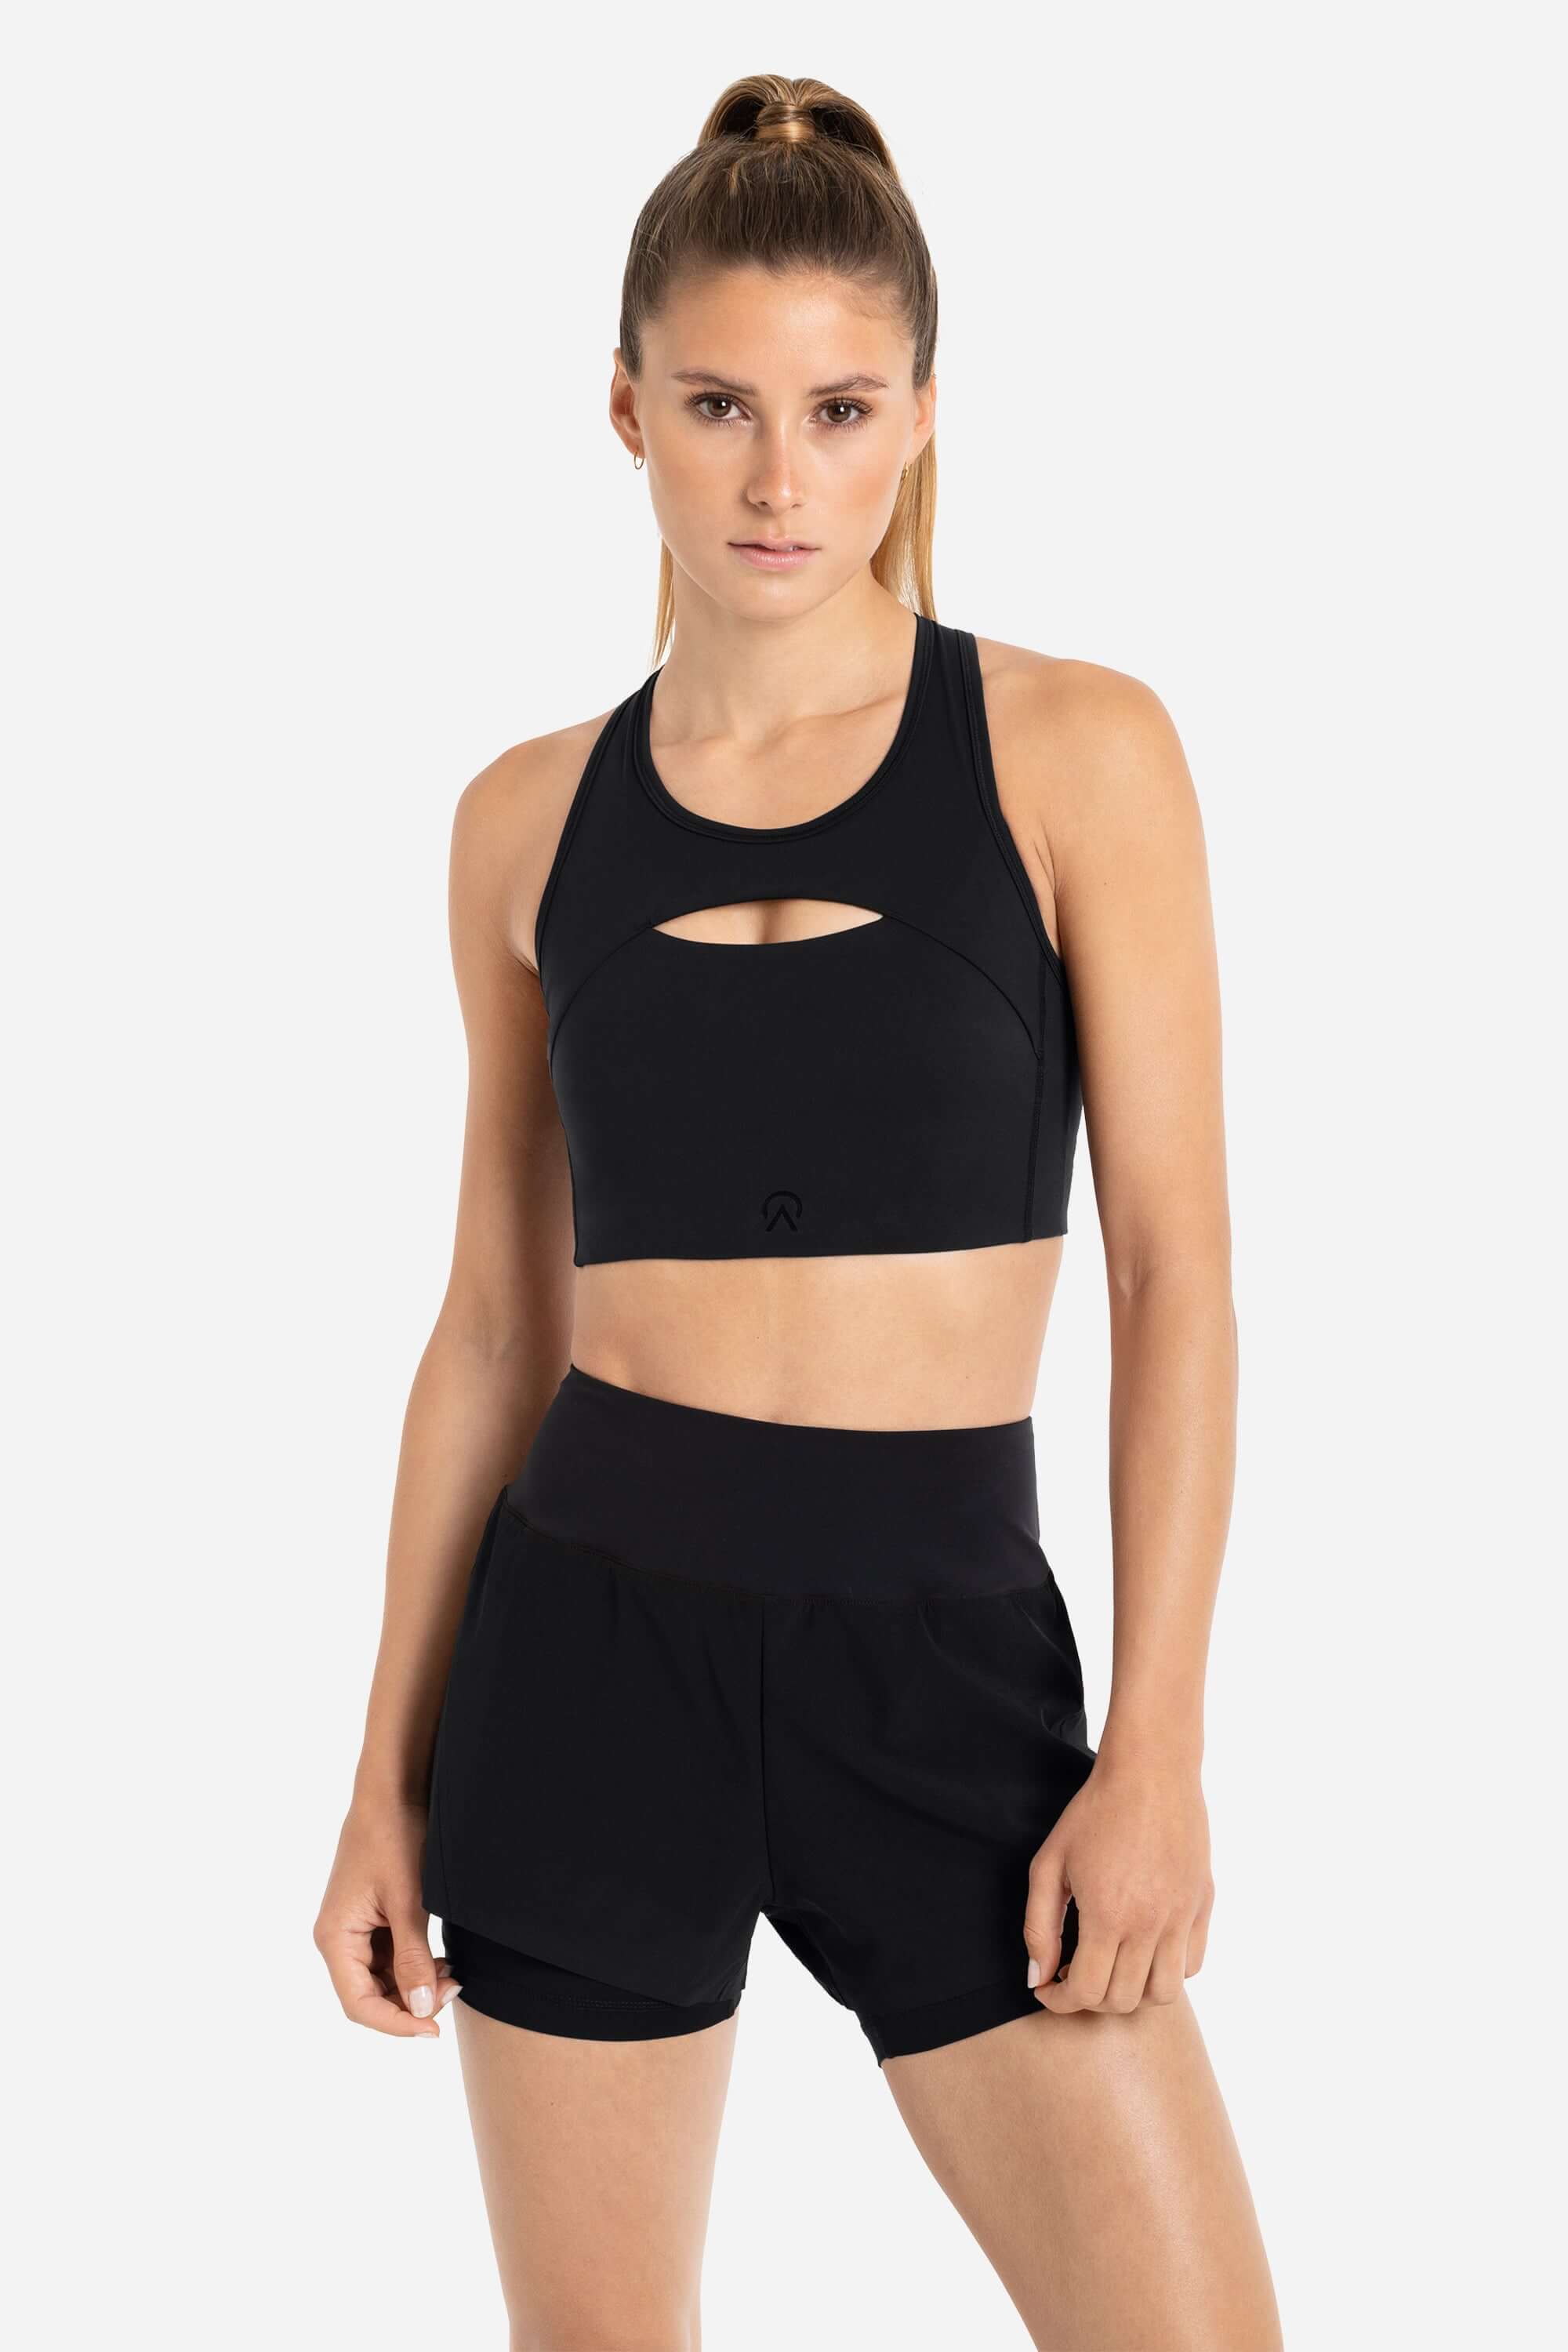 women wearing a sports bra in black with black shorts from AYCANE